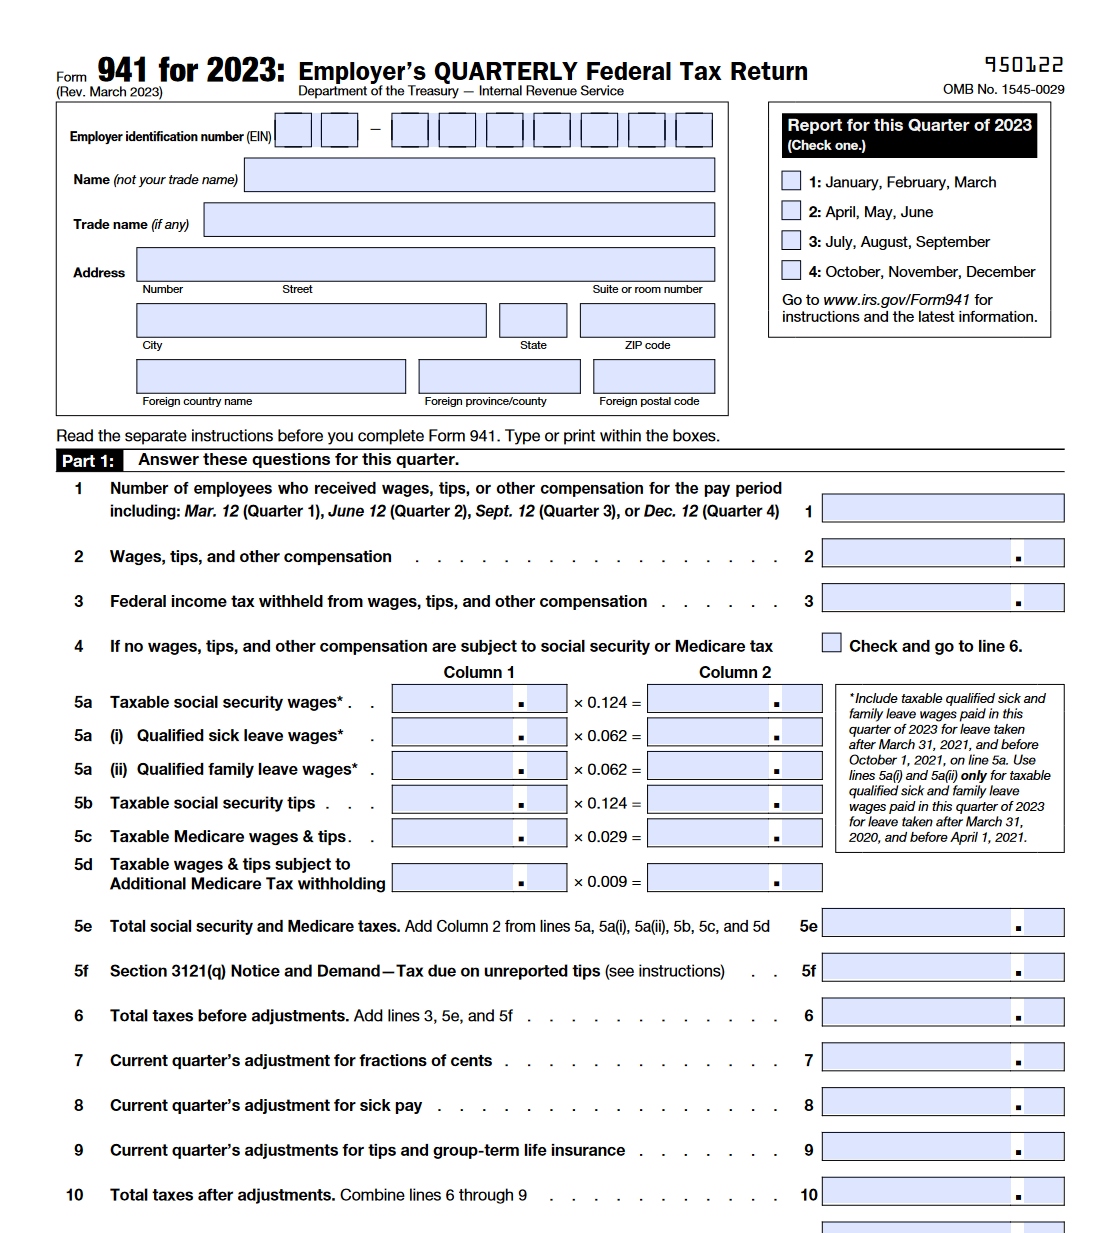 irs-form-941-employer-s-quarterly-federal-tax-return-forms-docs-2023